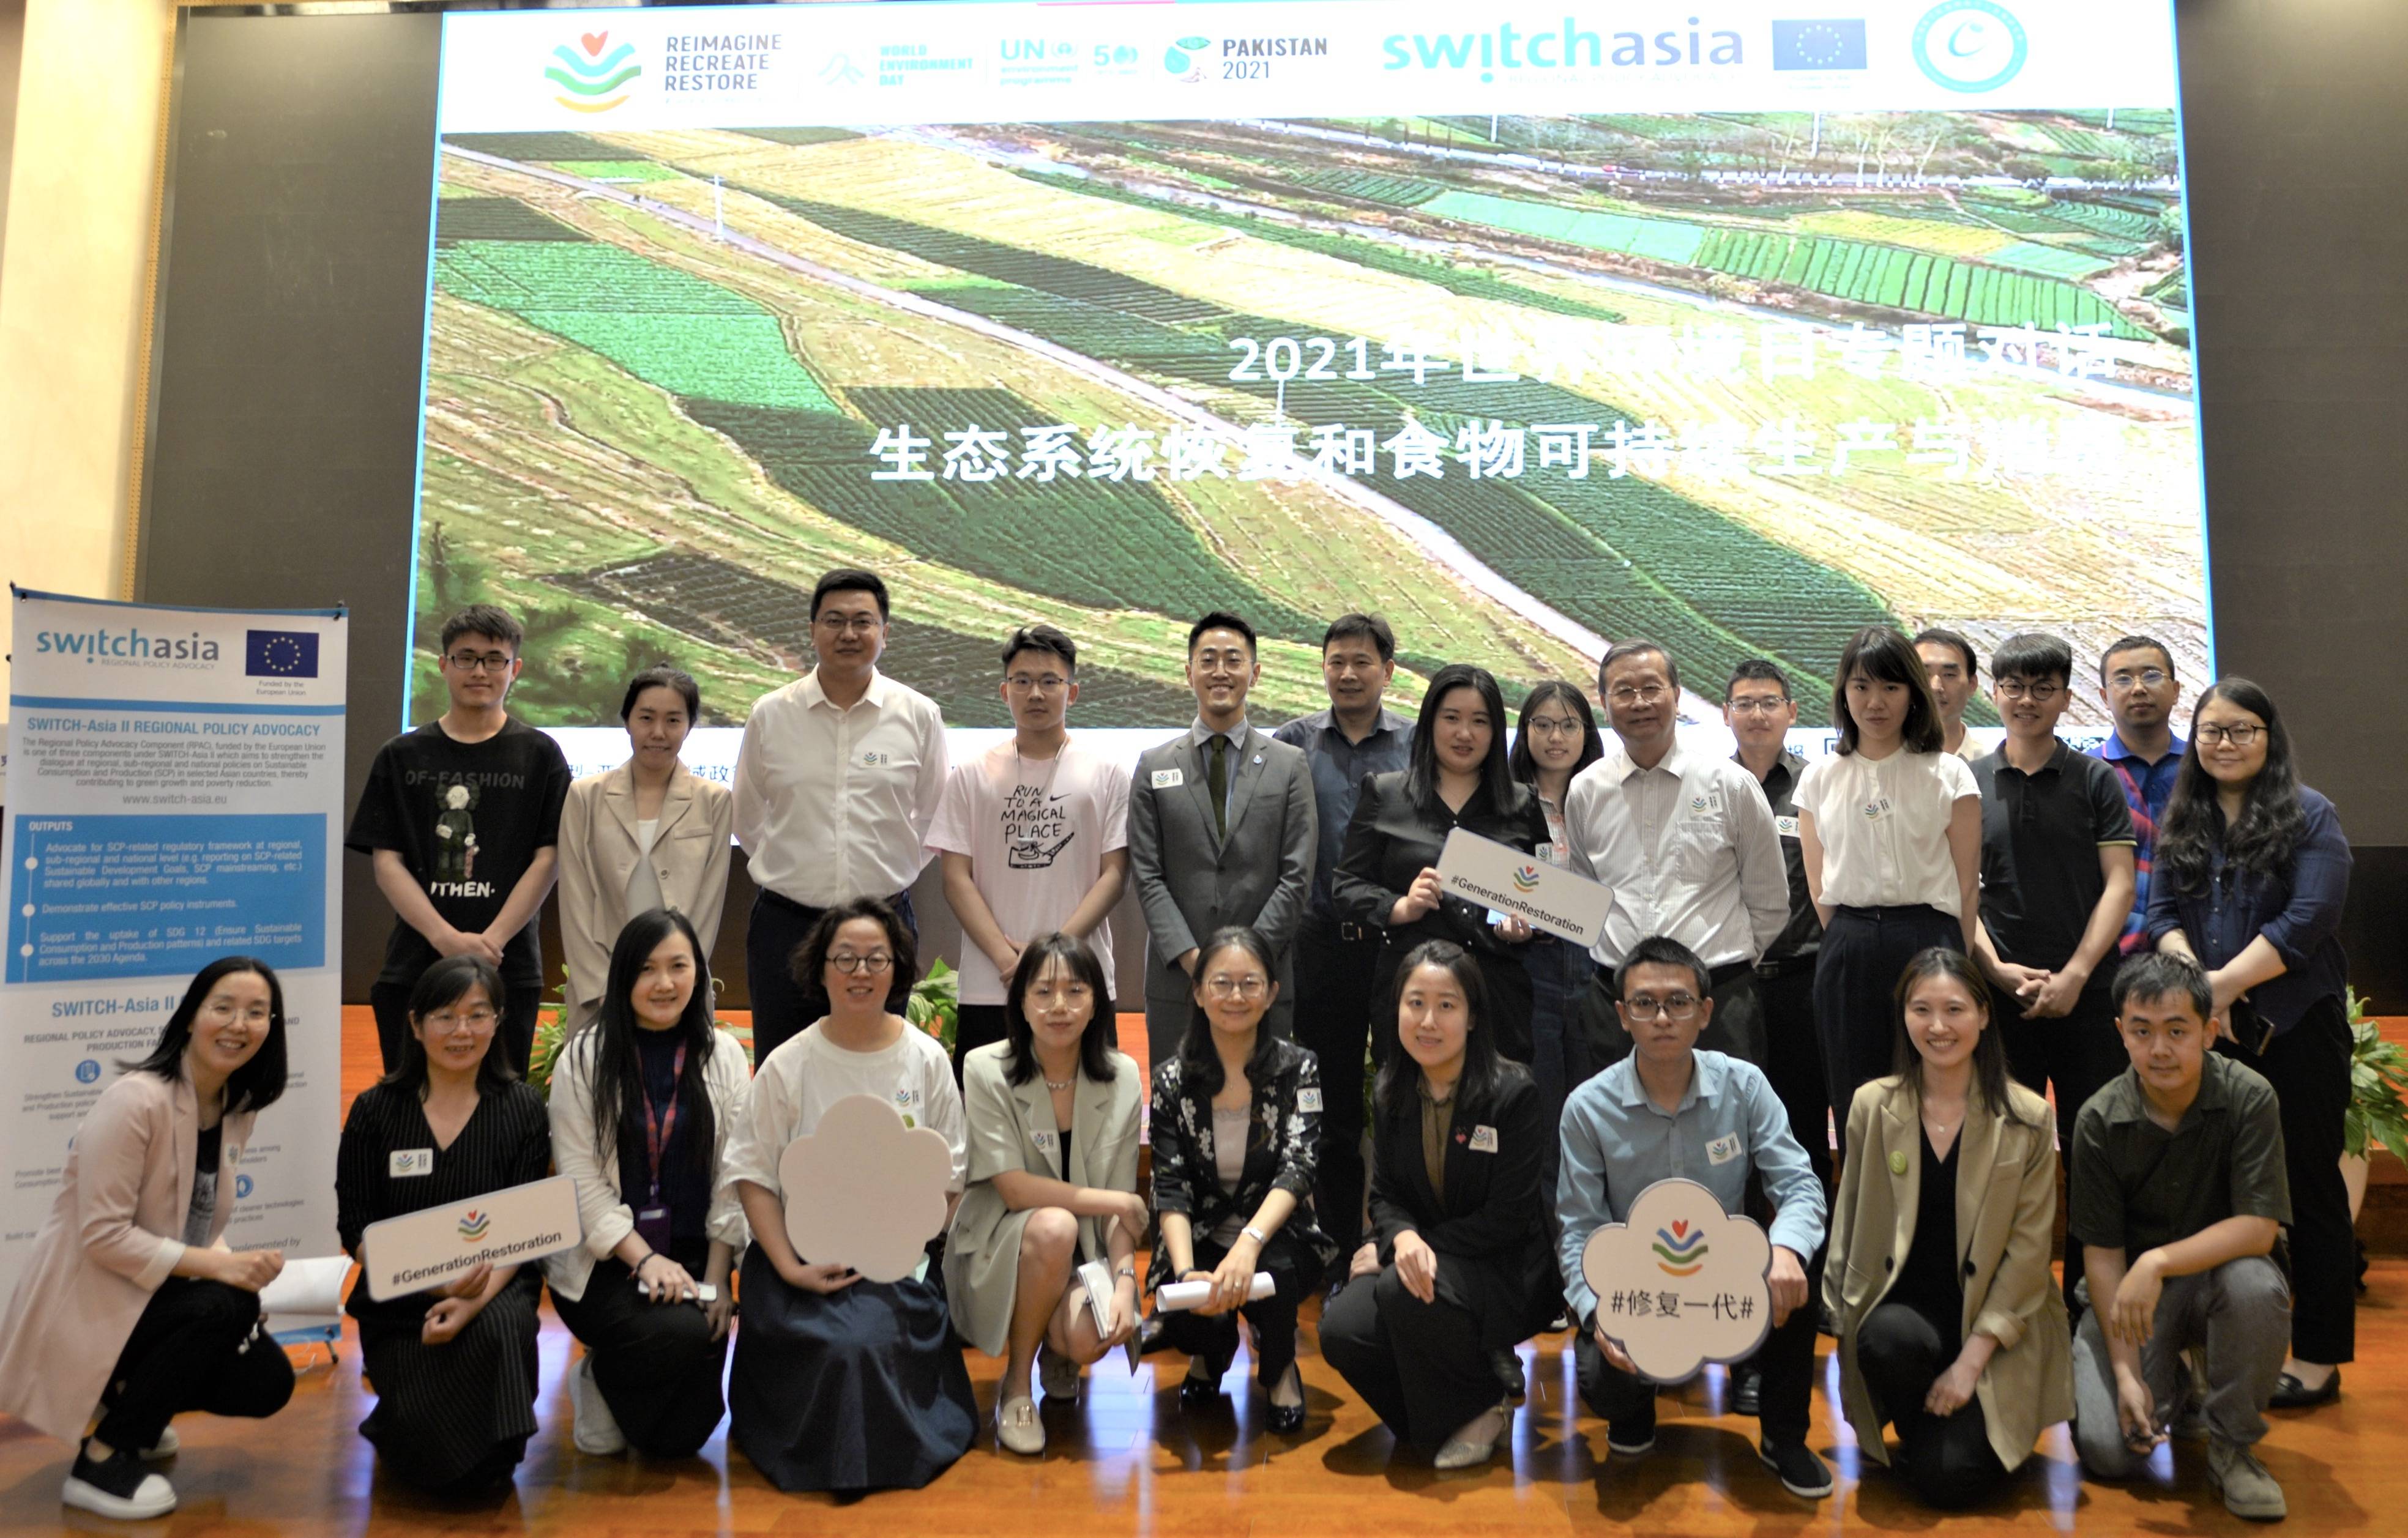 Ecosystem Restoration and Sustainable Food Production and Consumption in China